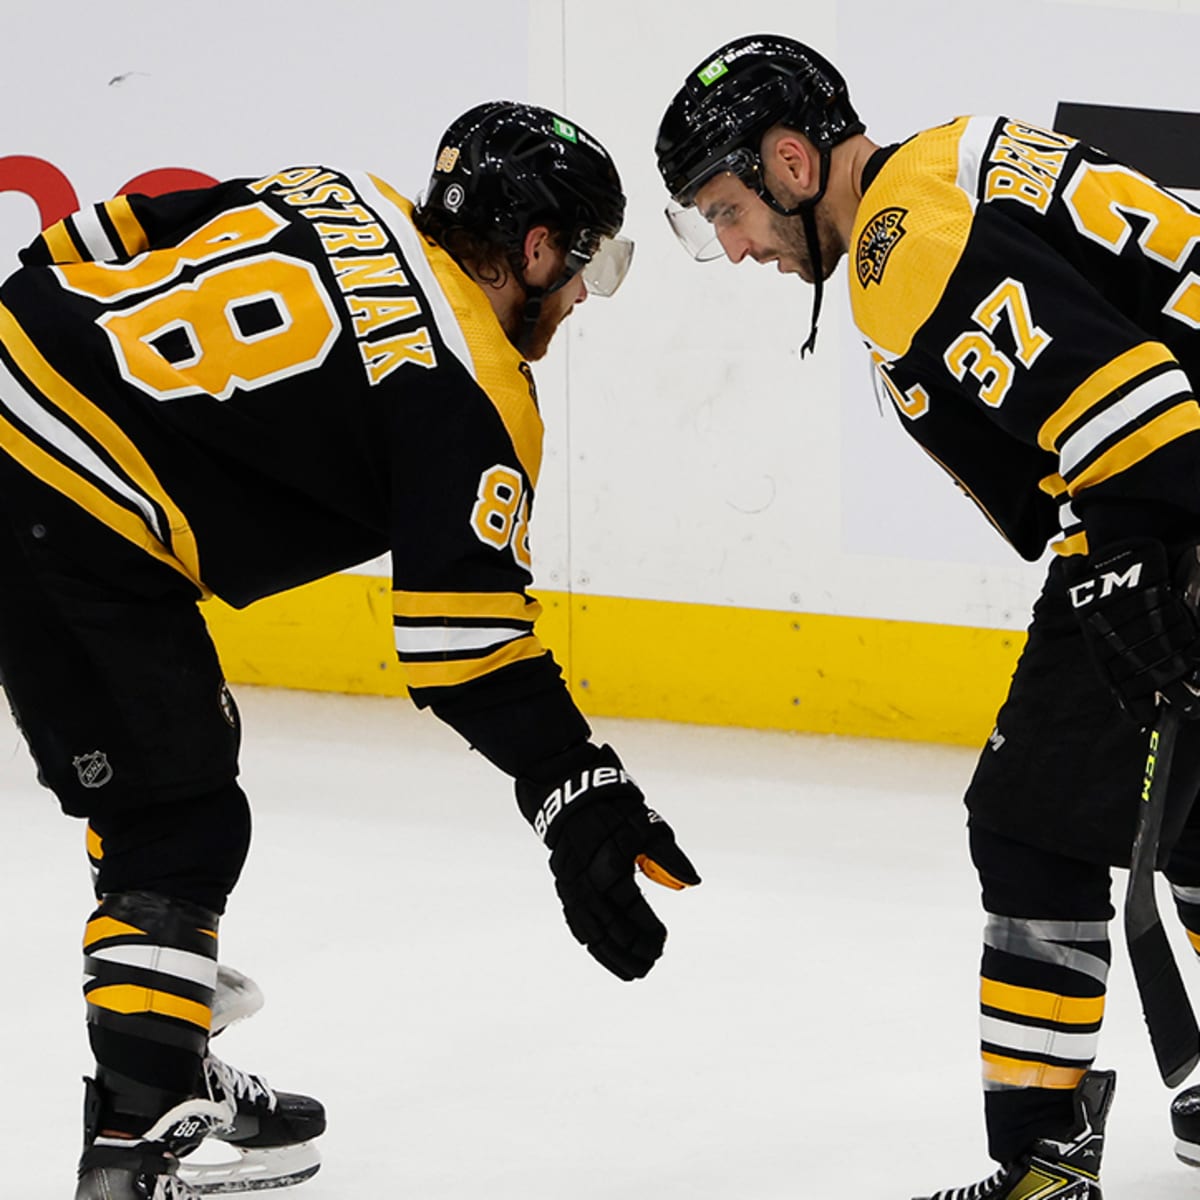 NHL roundup: Boston Bruins become fastest team to 50 wins in league history